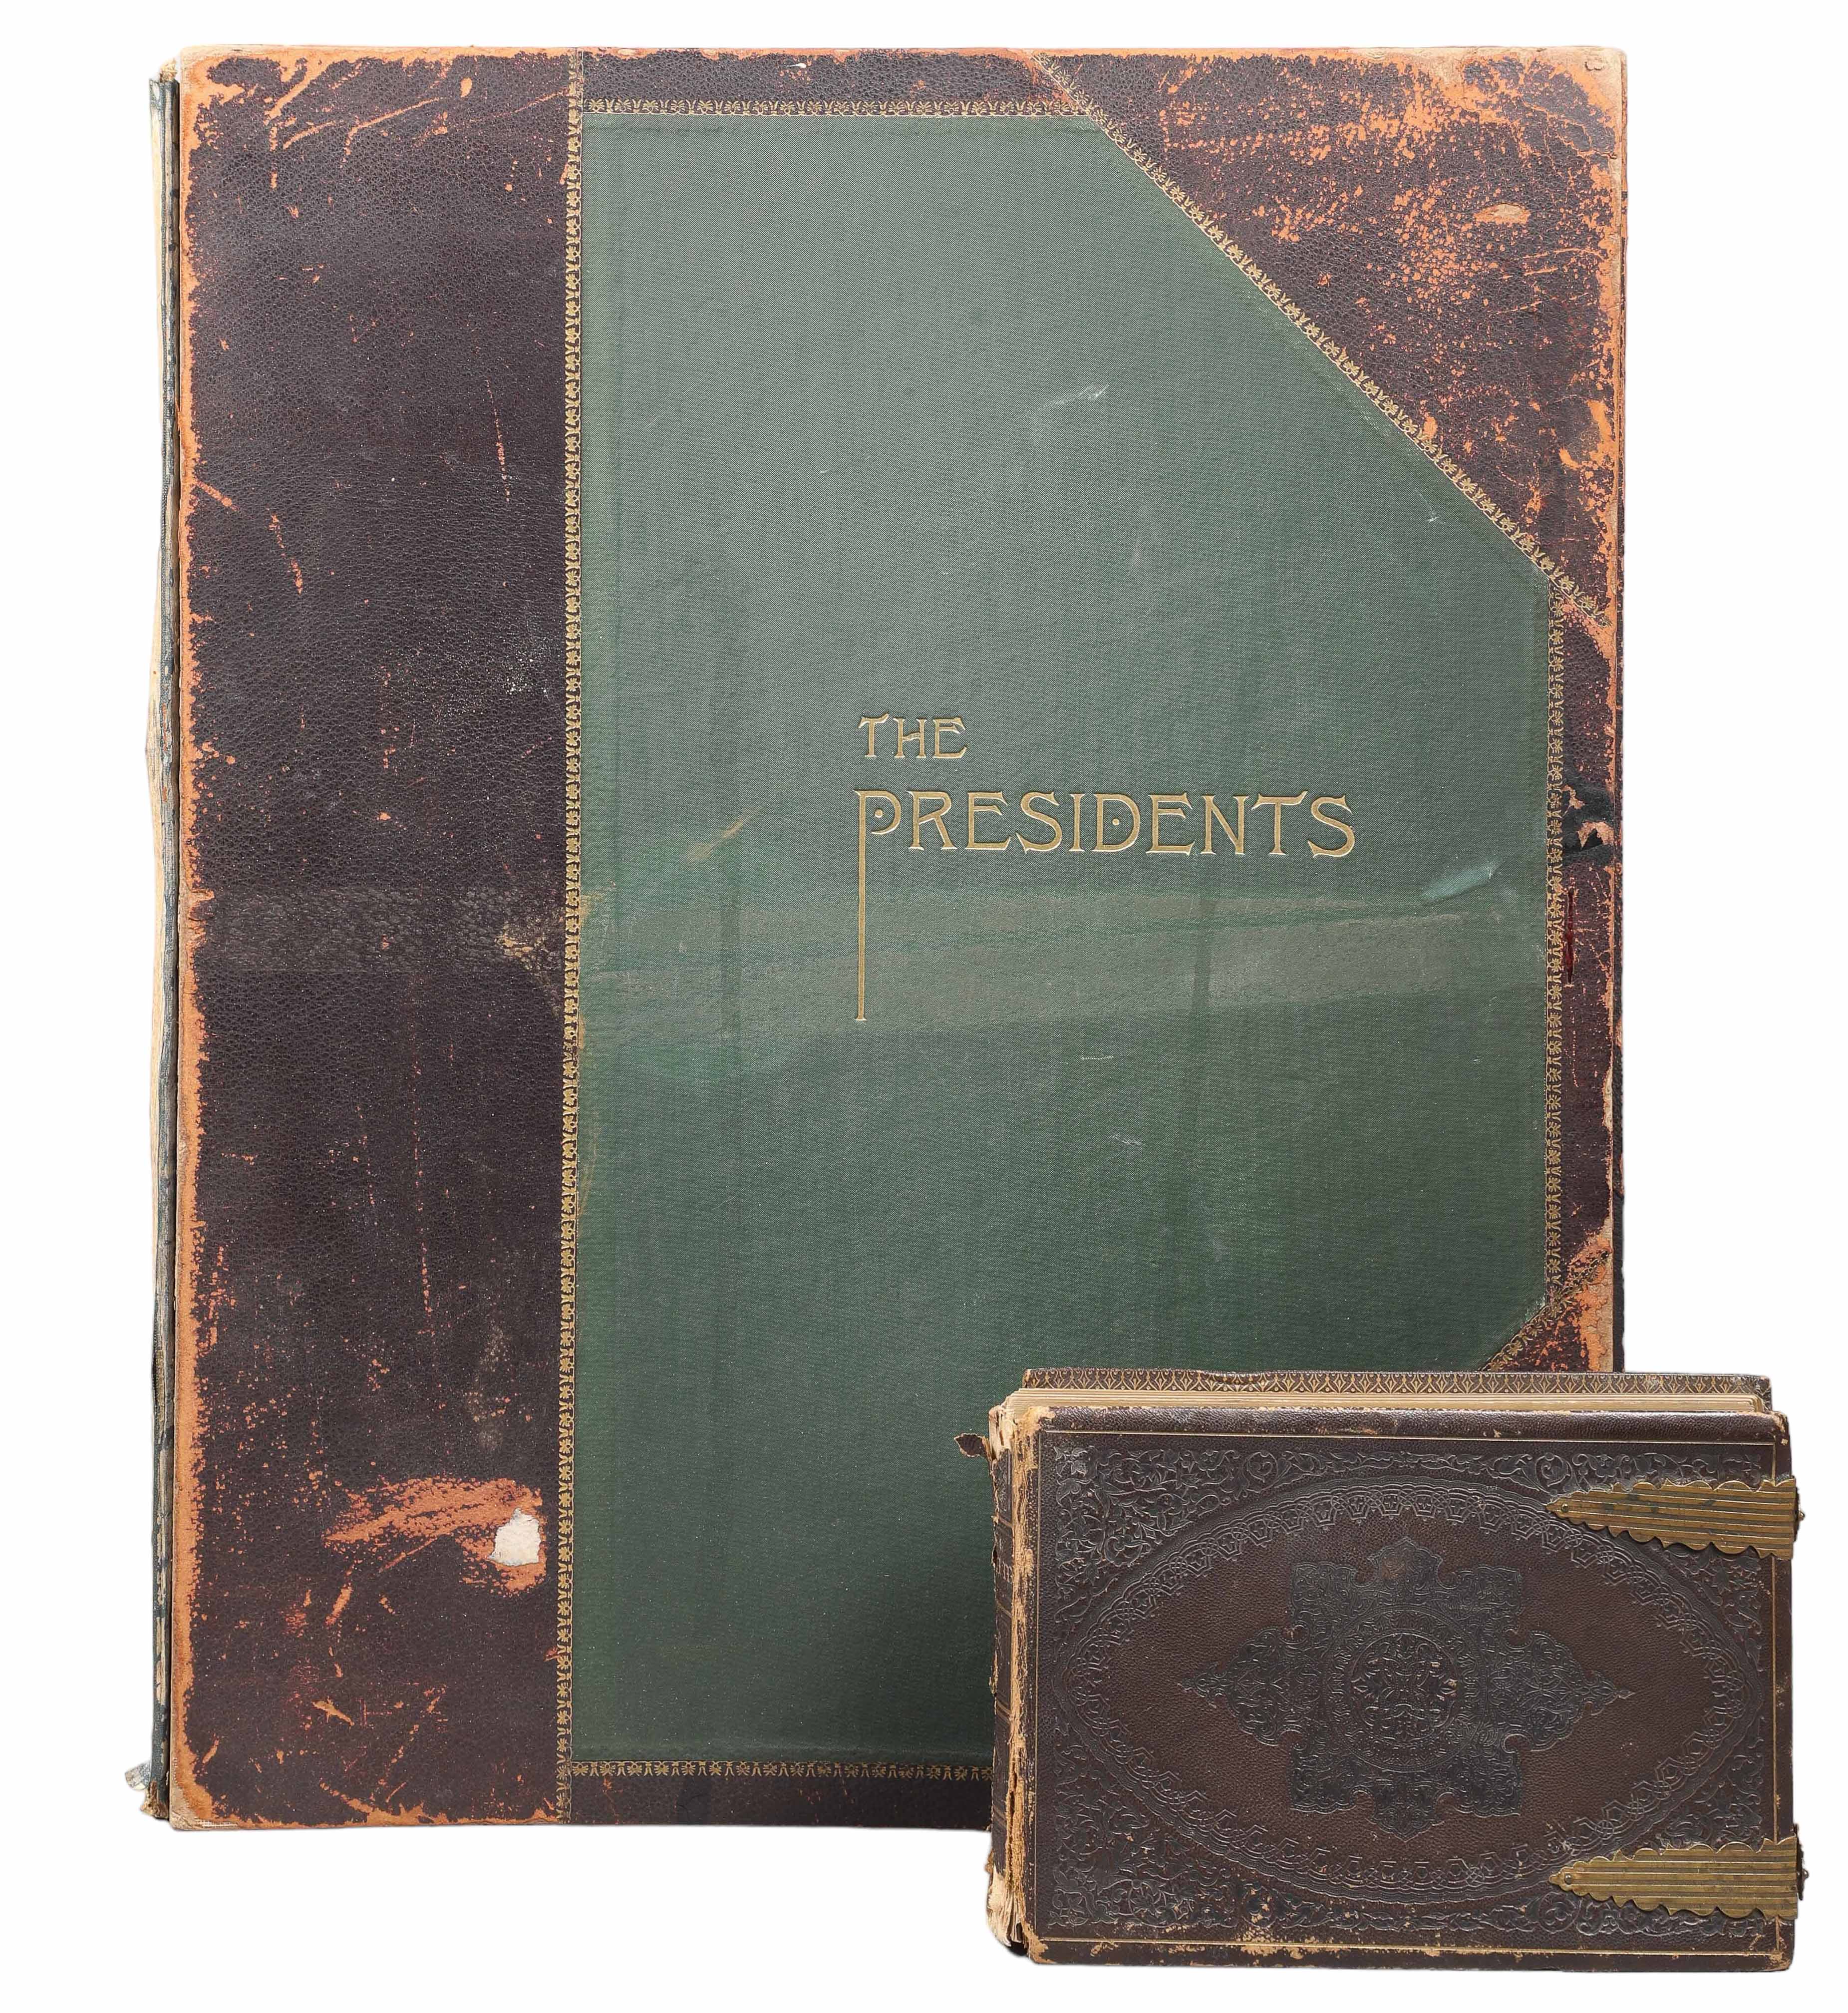 The Presidents book and photo album